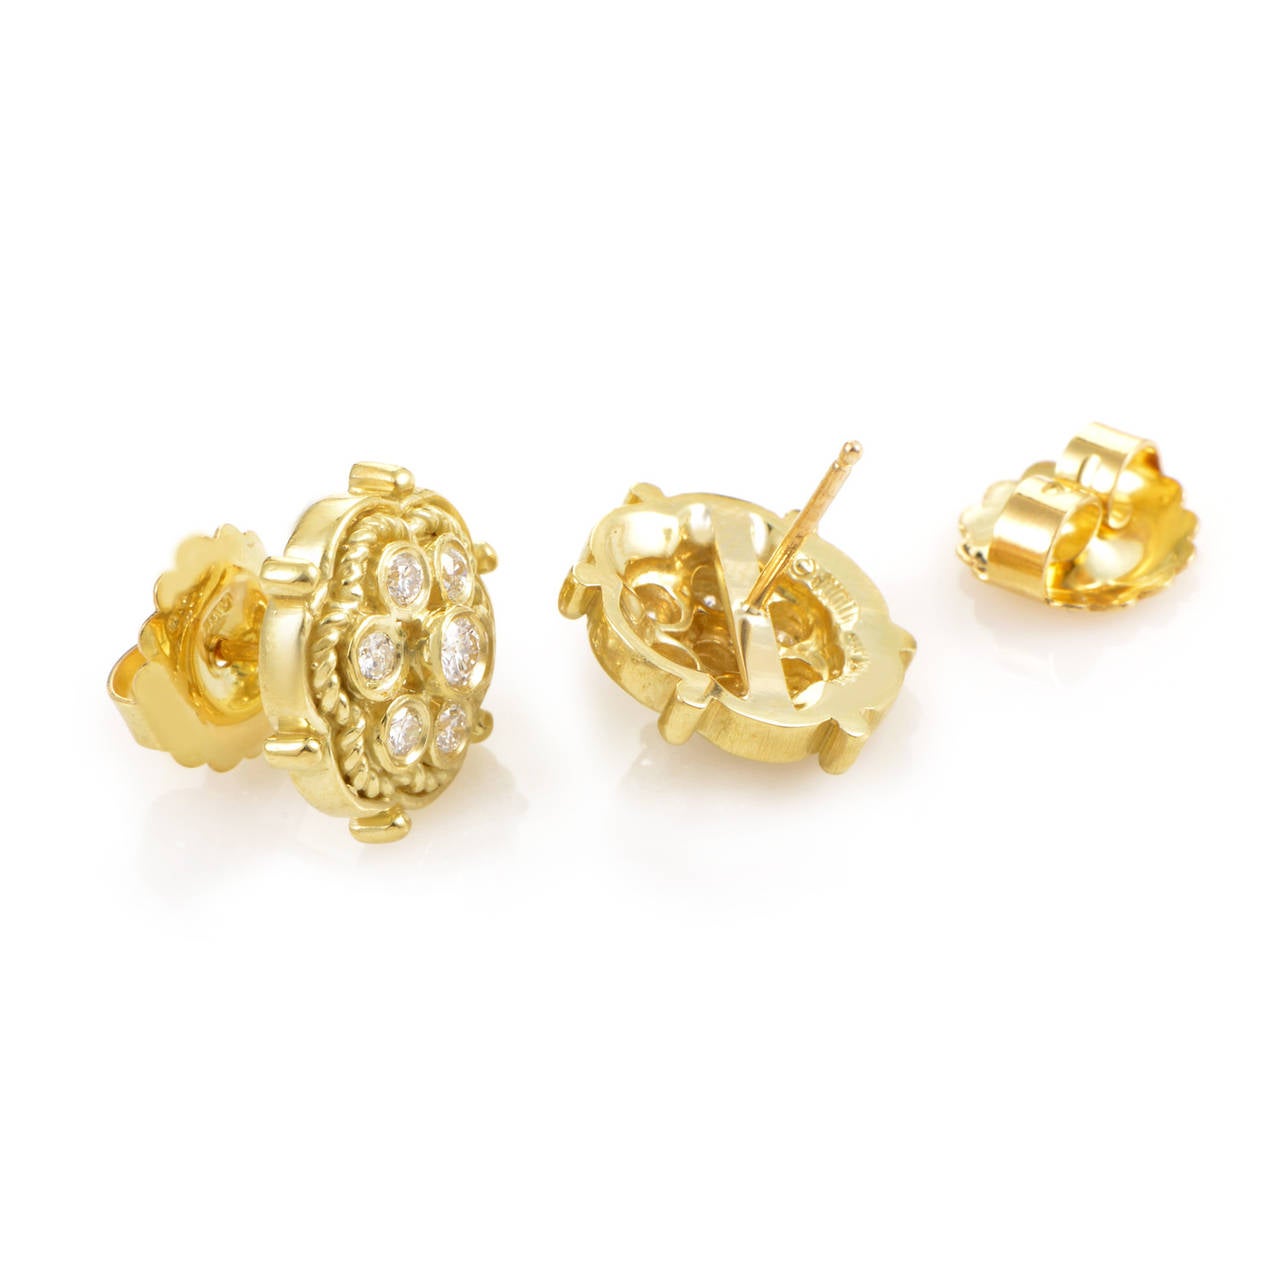 Simple and sweet are the perfect words to describe this pair of stud earrings from Judith Ripka. The earrings are made of 18K yellow gold and are set with .50 carats of white diamonds.